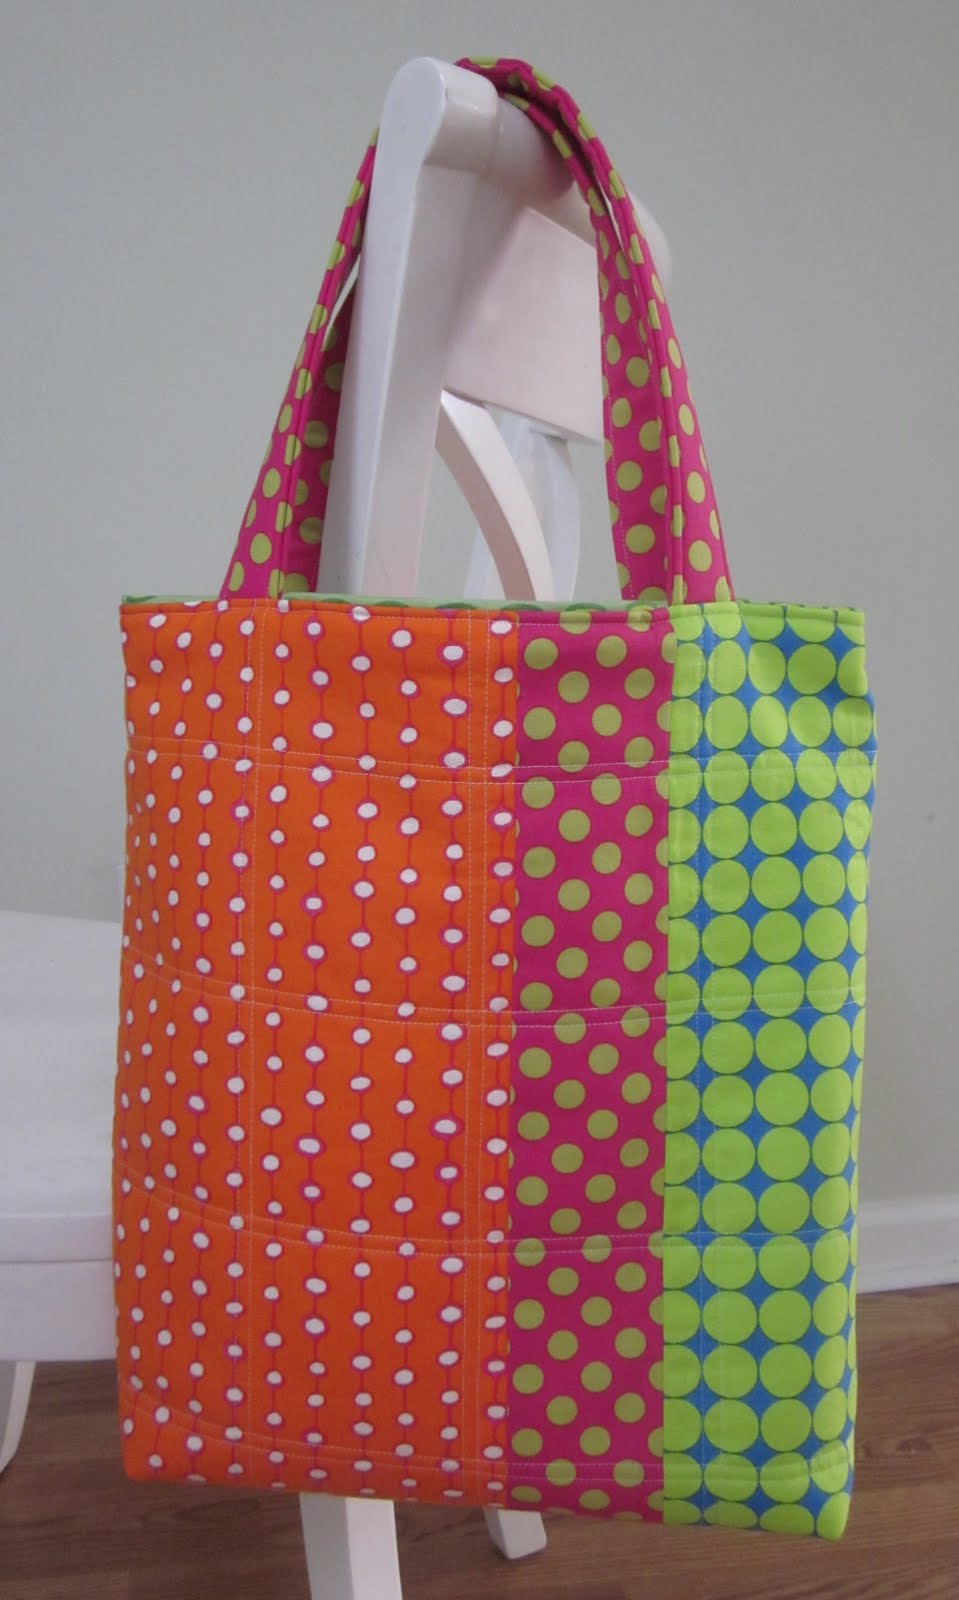 s.o.t.a.k handmade: Picnic blanket and a tote